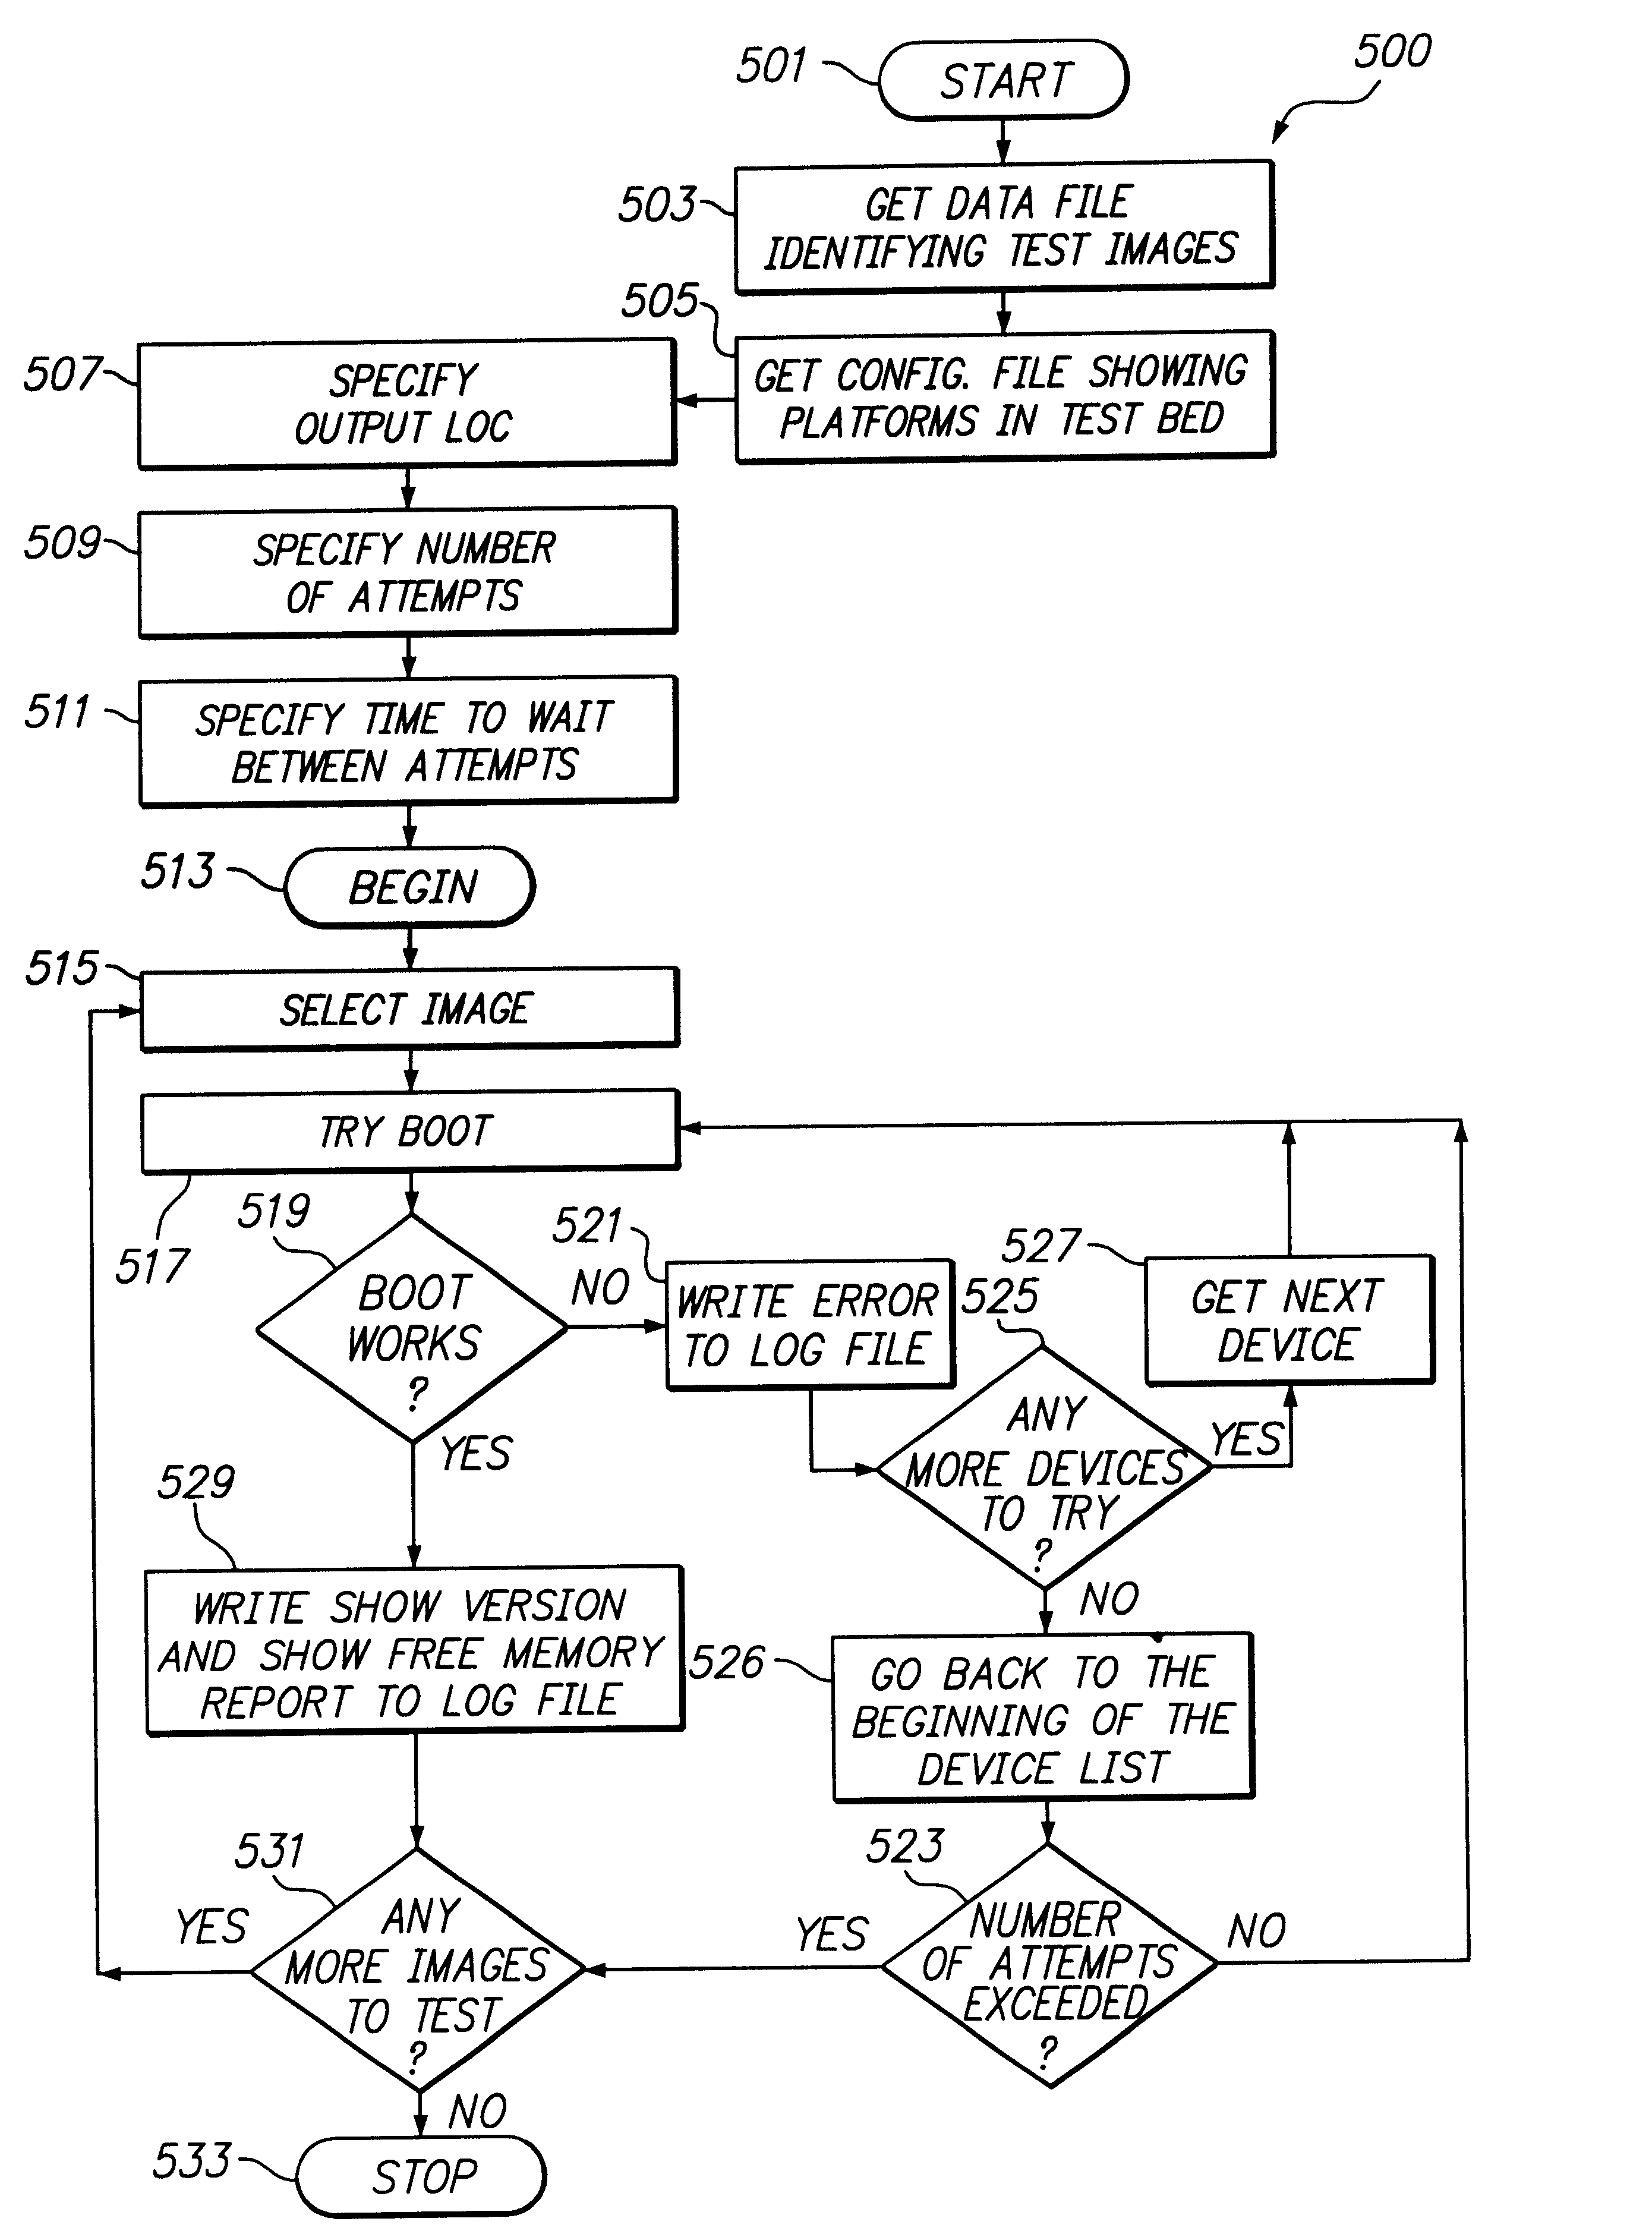 Method and system for an automated net booting tool